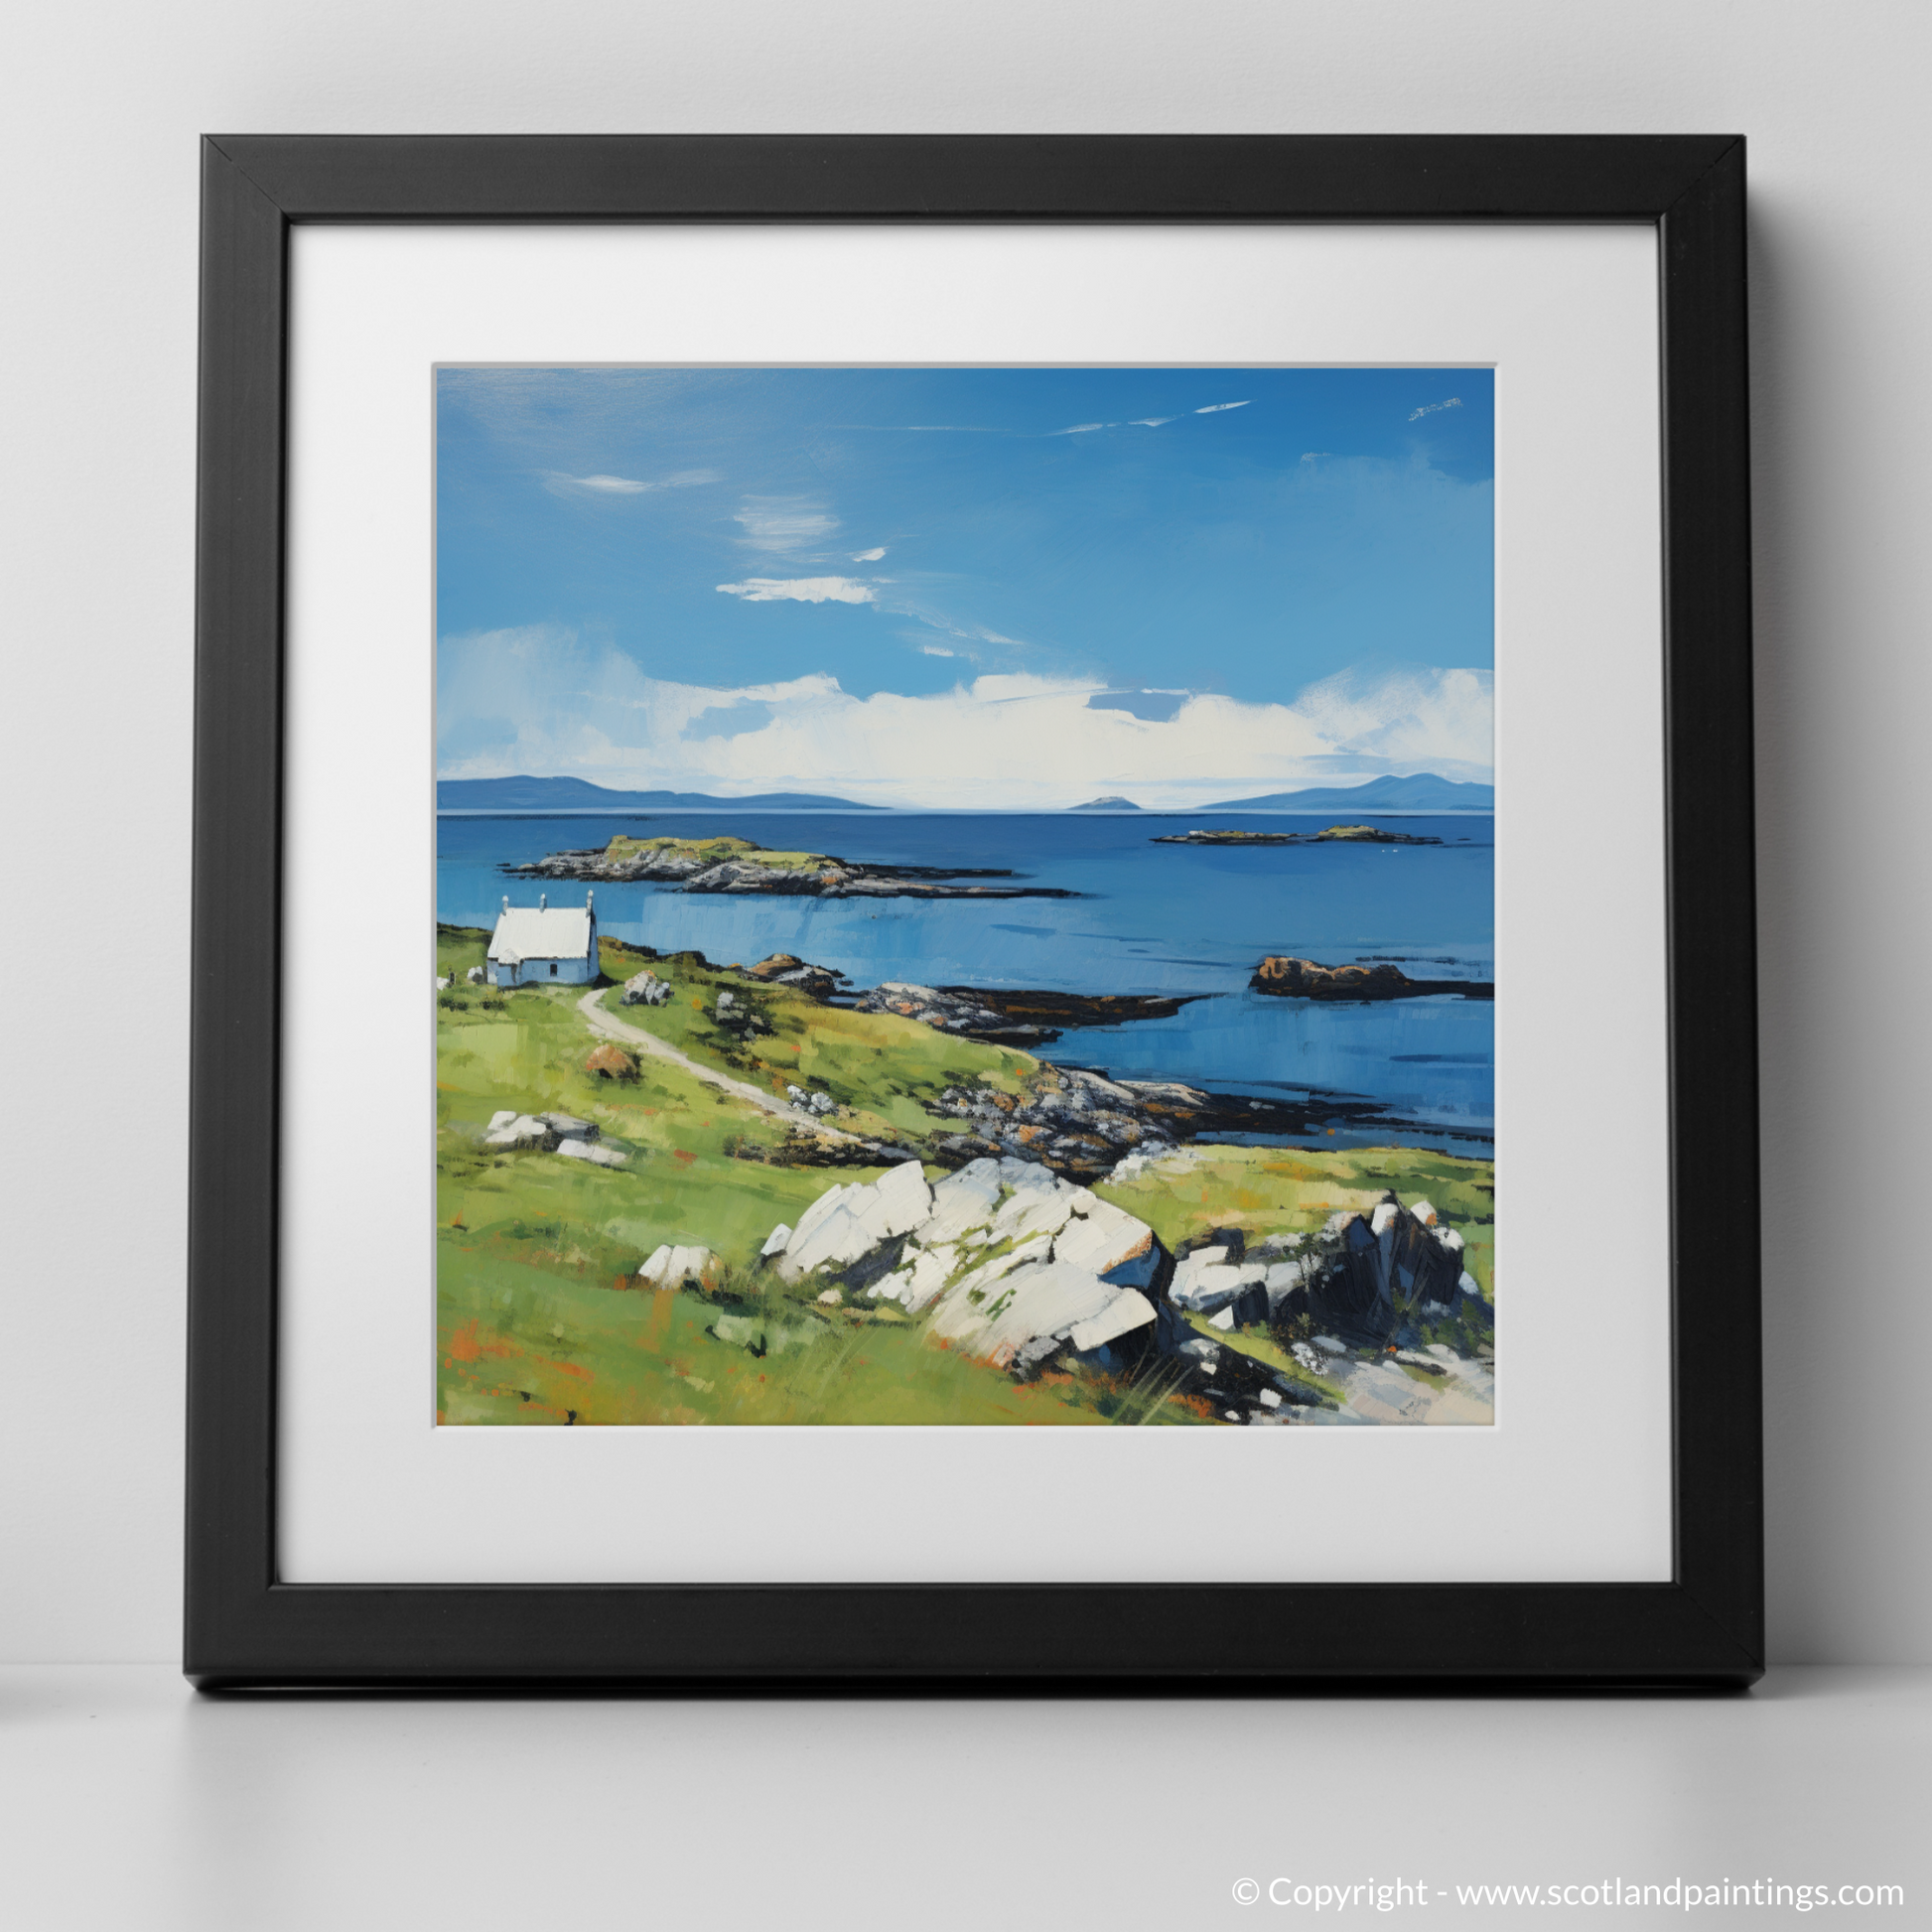 Art Print of Isle of Scalpay, Outer Hebrides in summer with a black frame